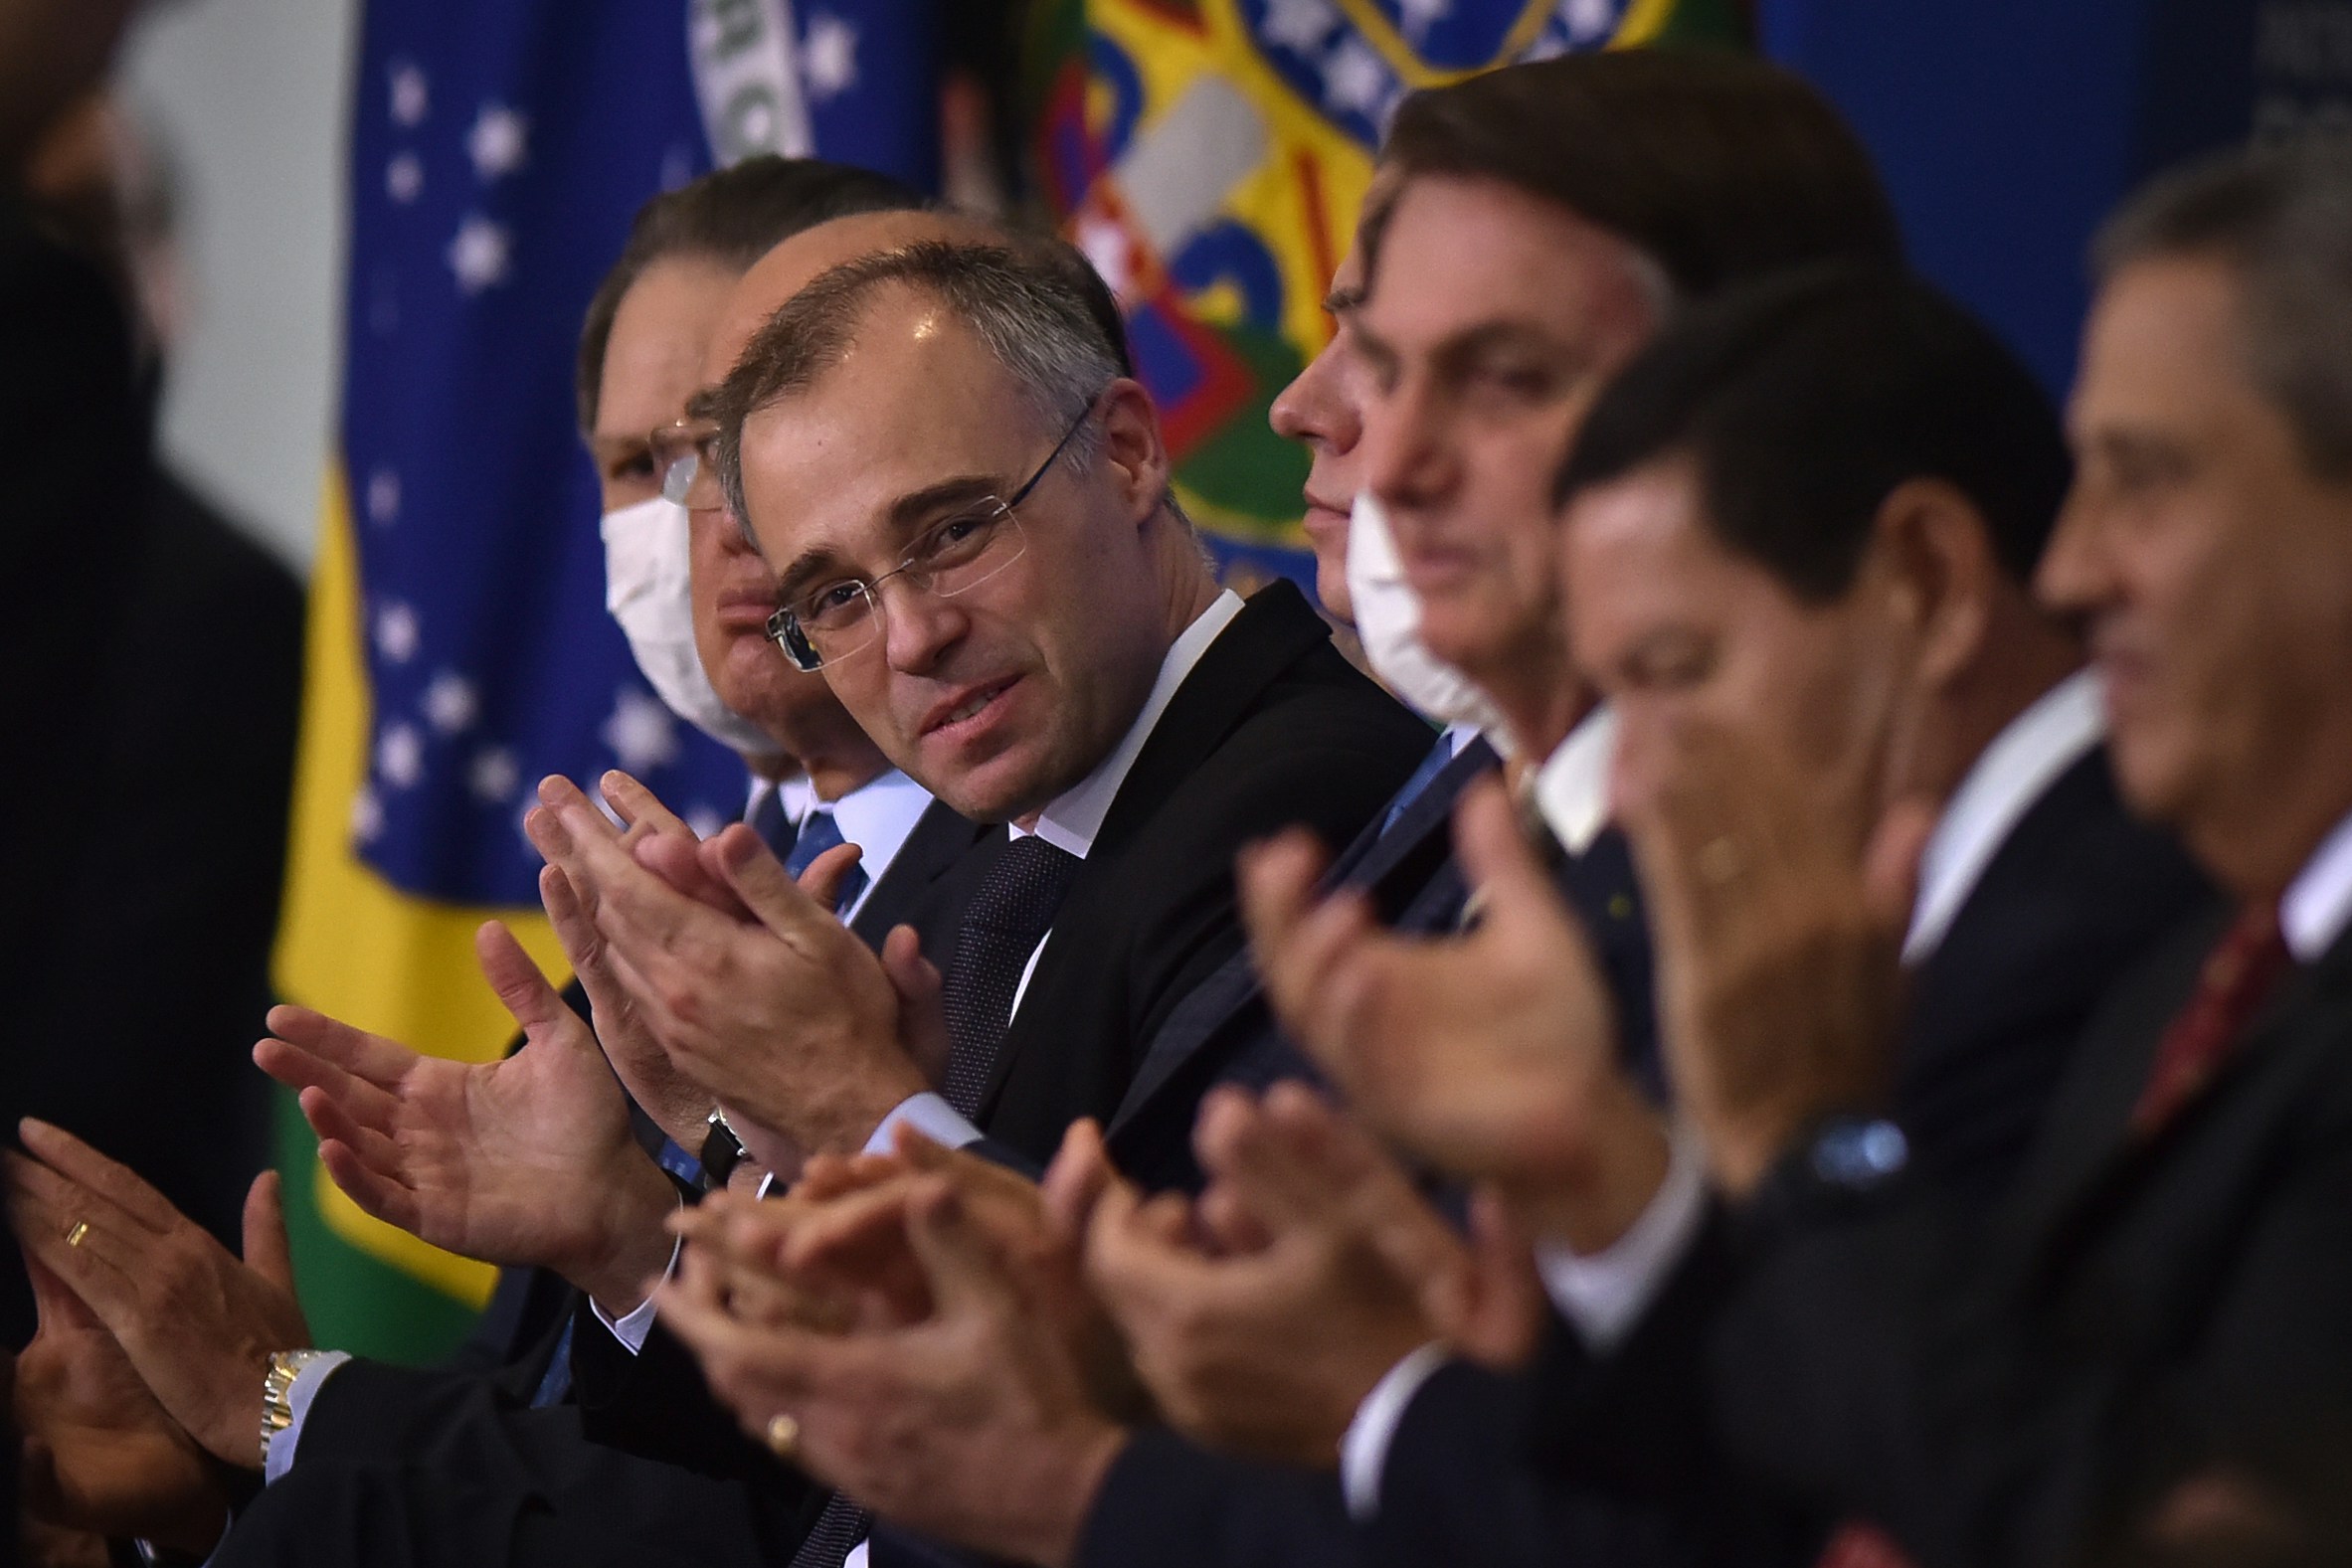 Andre Mendonca, Brazil's new minister of justice, center, applauds during an inauguration ceremony with Jair Bolsonaro, Brazil's president, at Planalto Palace in Brasilia, Brazil, on Wednesday, April 29, 2020. Medonca is taking over after Sergio Moro quit the post following Bolsonaro's firing of the federal police chief. Photographer: Andres Borges/Bloomberg via Getty Images